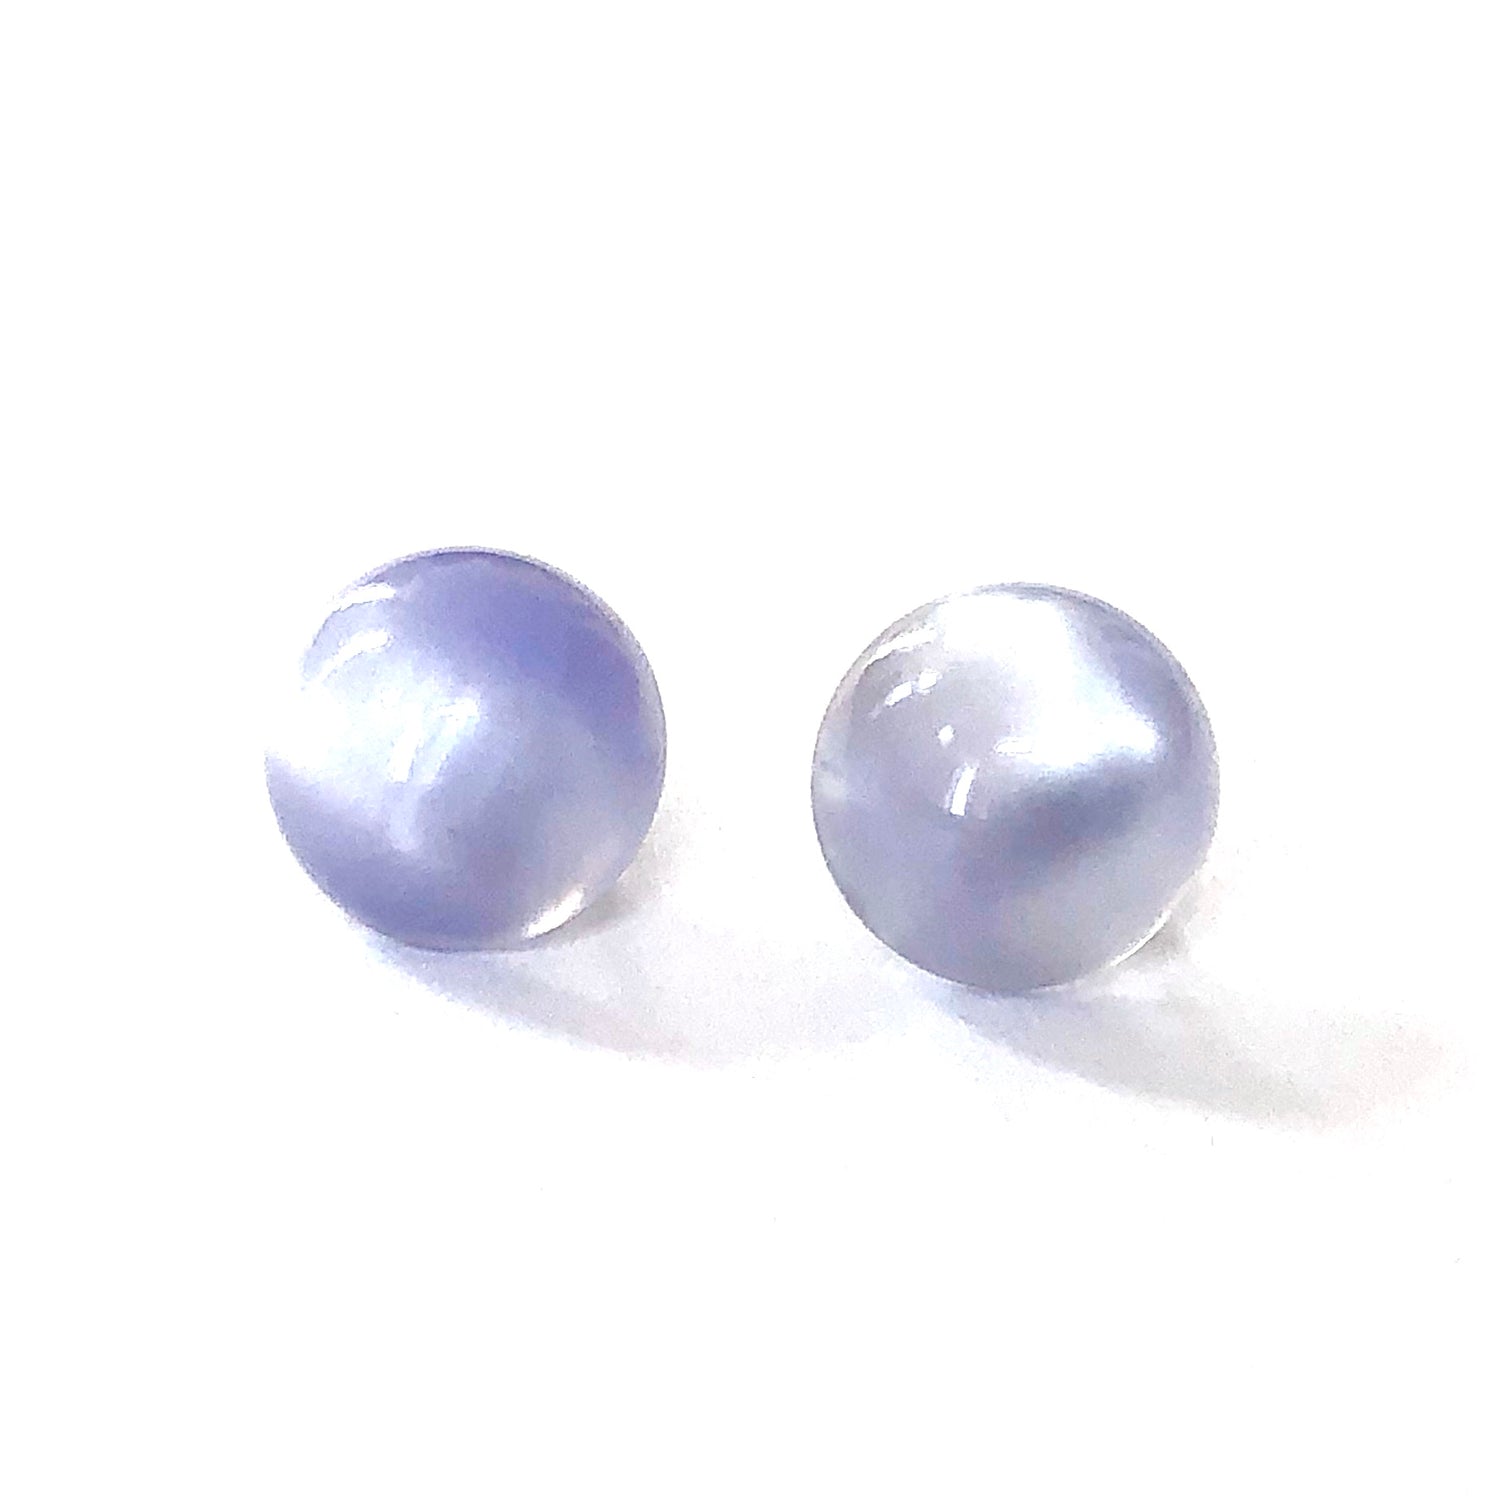 Lavender Moonglow Retro Button Studs Earrings